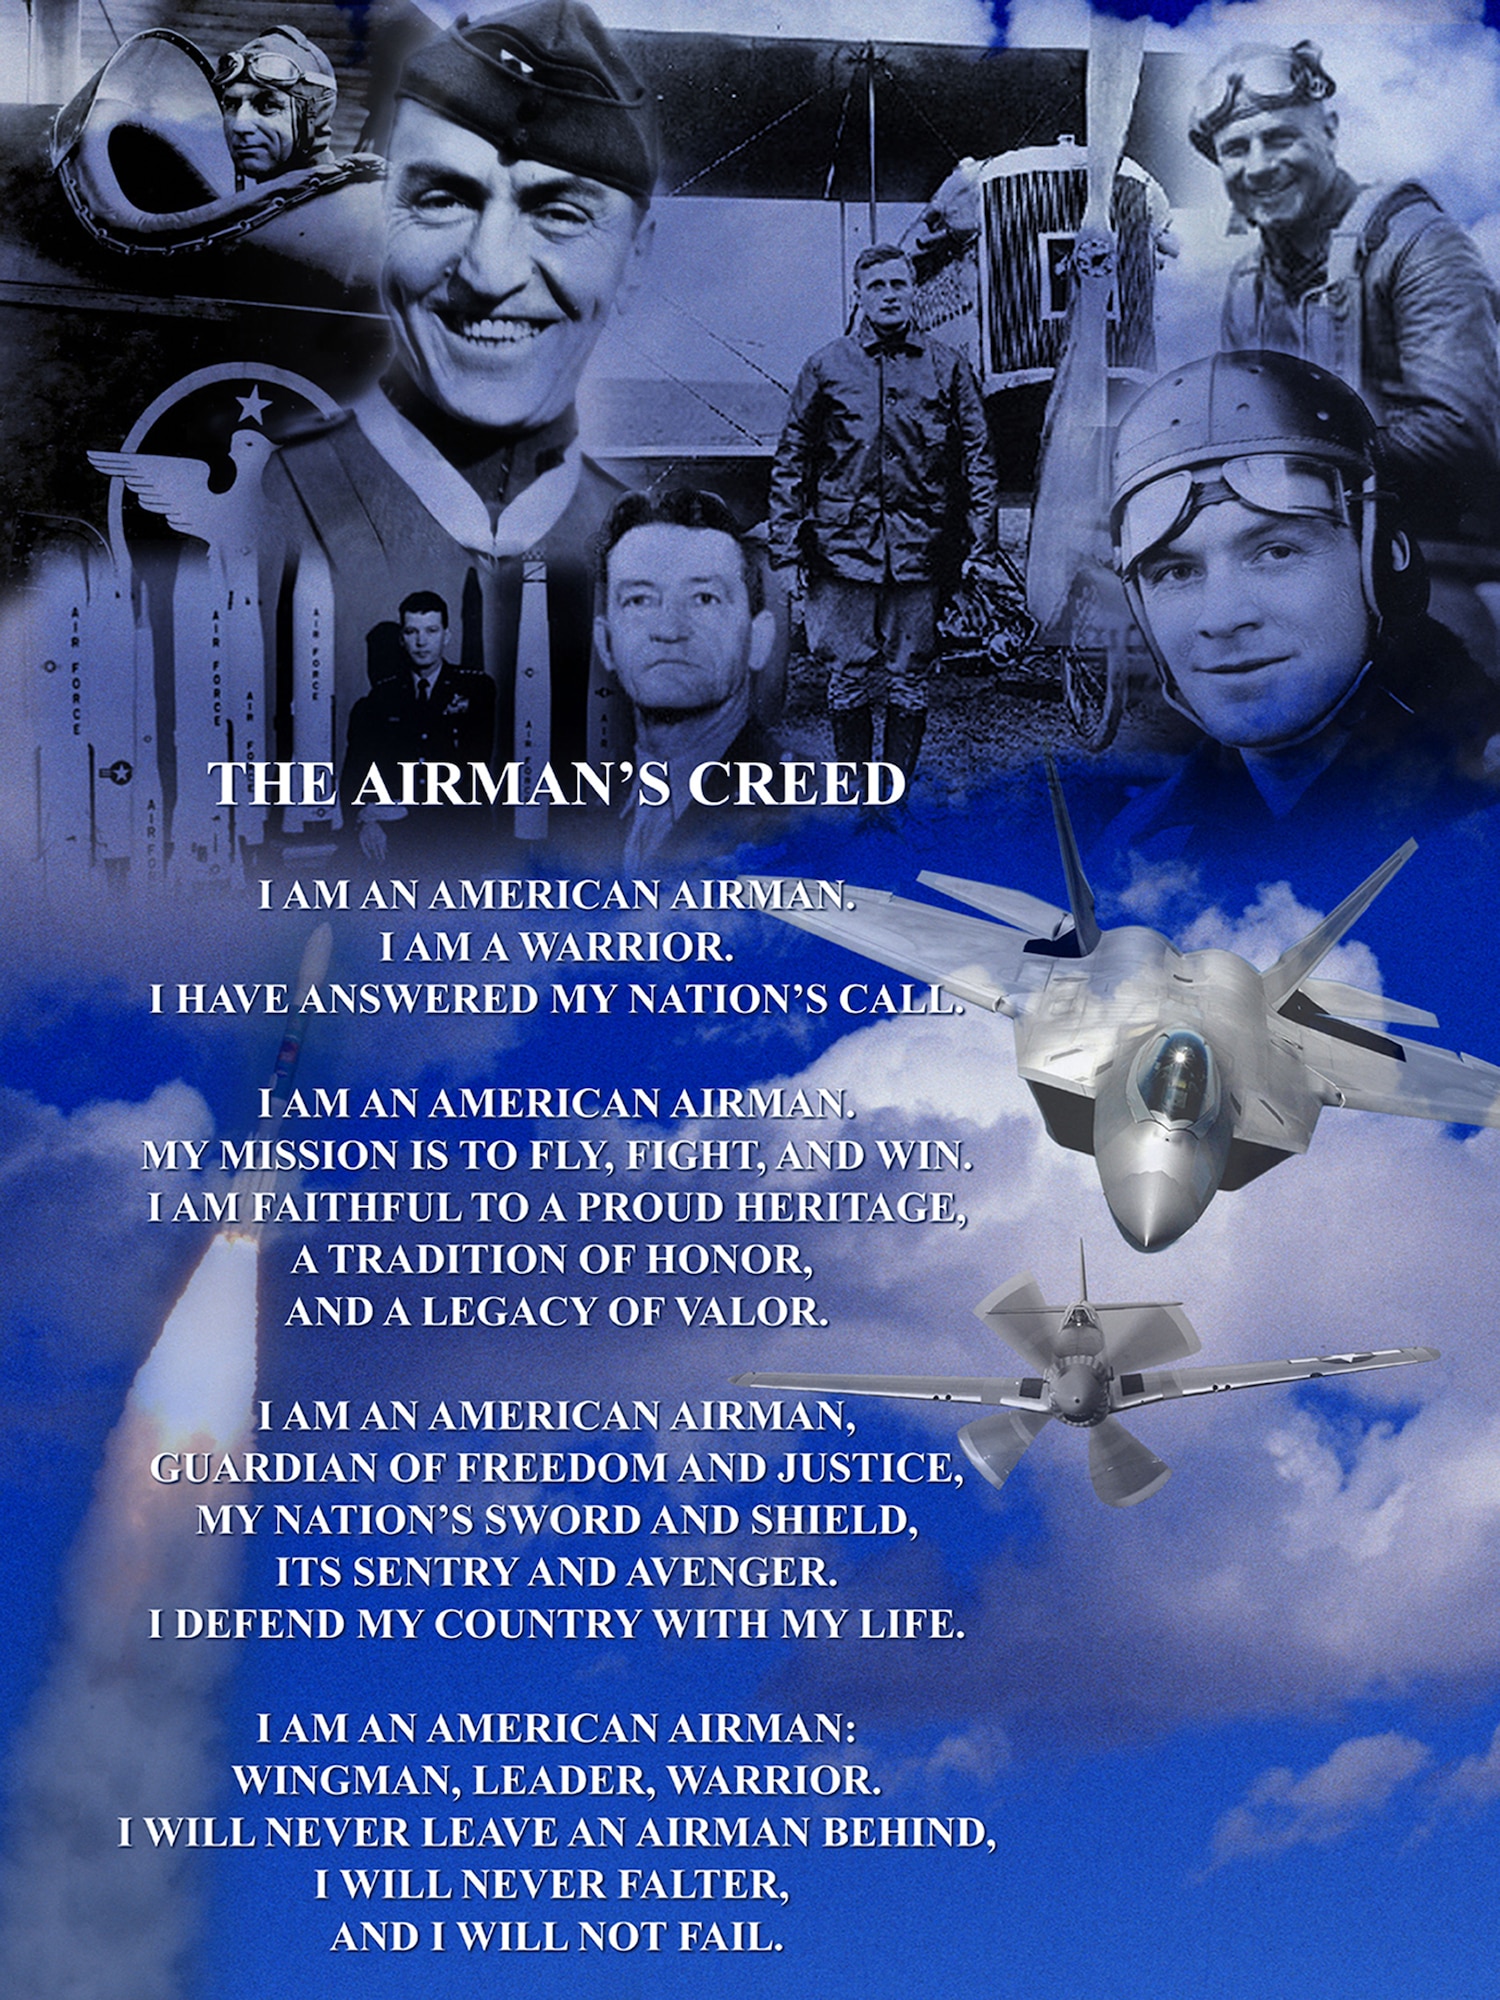 Airman's Creed Poster #6.  Version created/illustrated by Headquarters Air Force, SECAF and CSAF Executive Action Group HAF/CX. Image is 7.5x10 inches @ 300 ppi and is available up to 8.5x11 inches @ 300 ppi. This version can be obtained in PDF format for local printing.